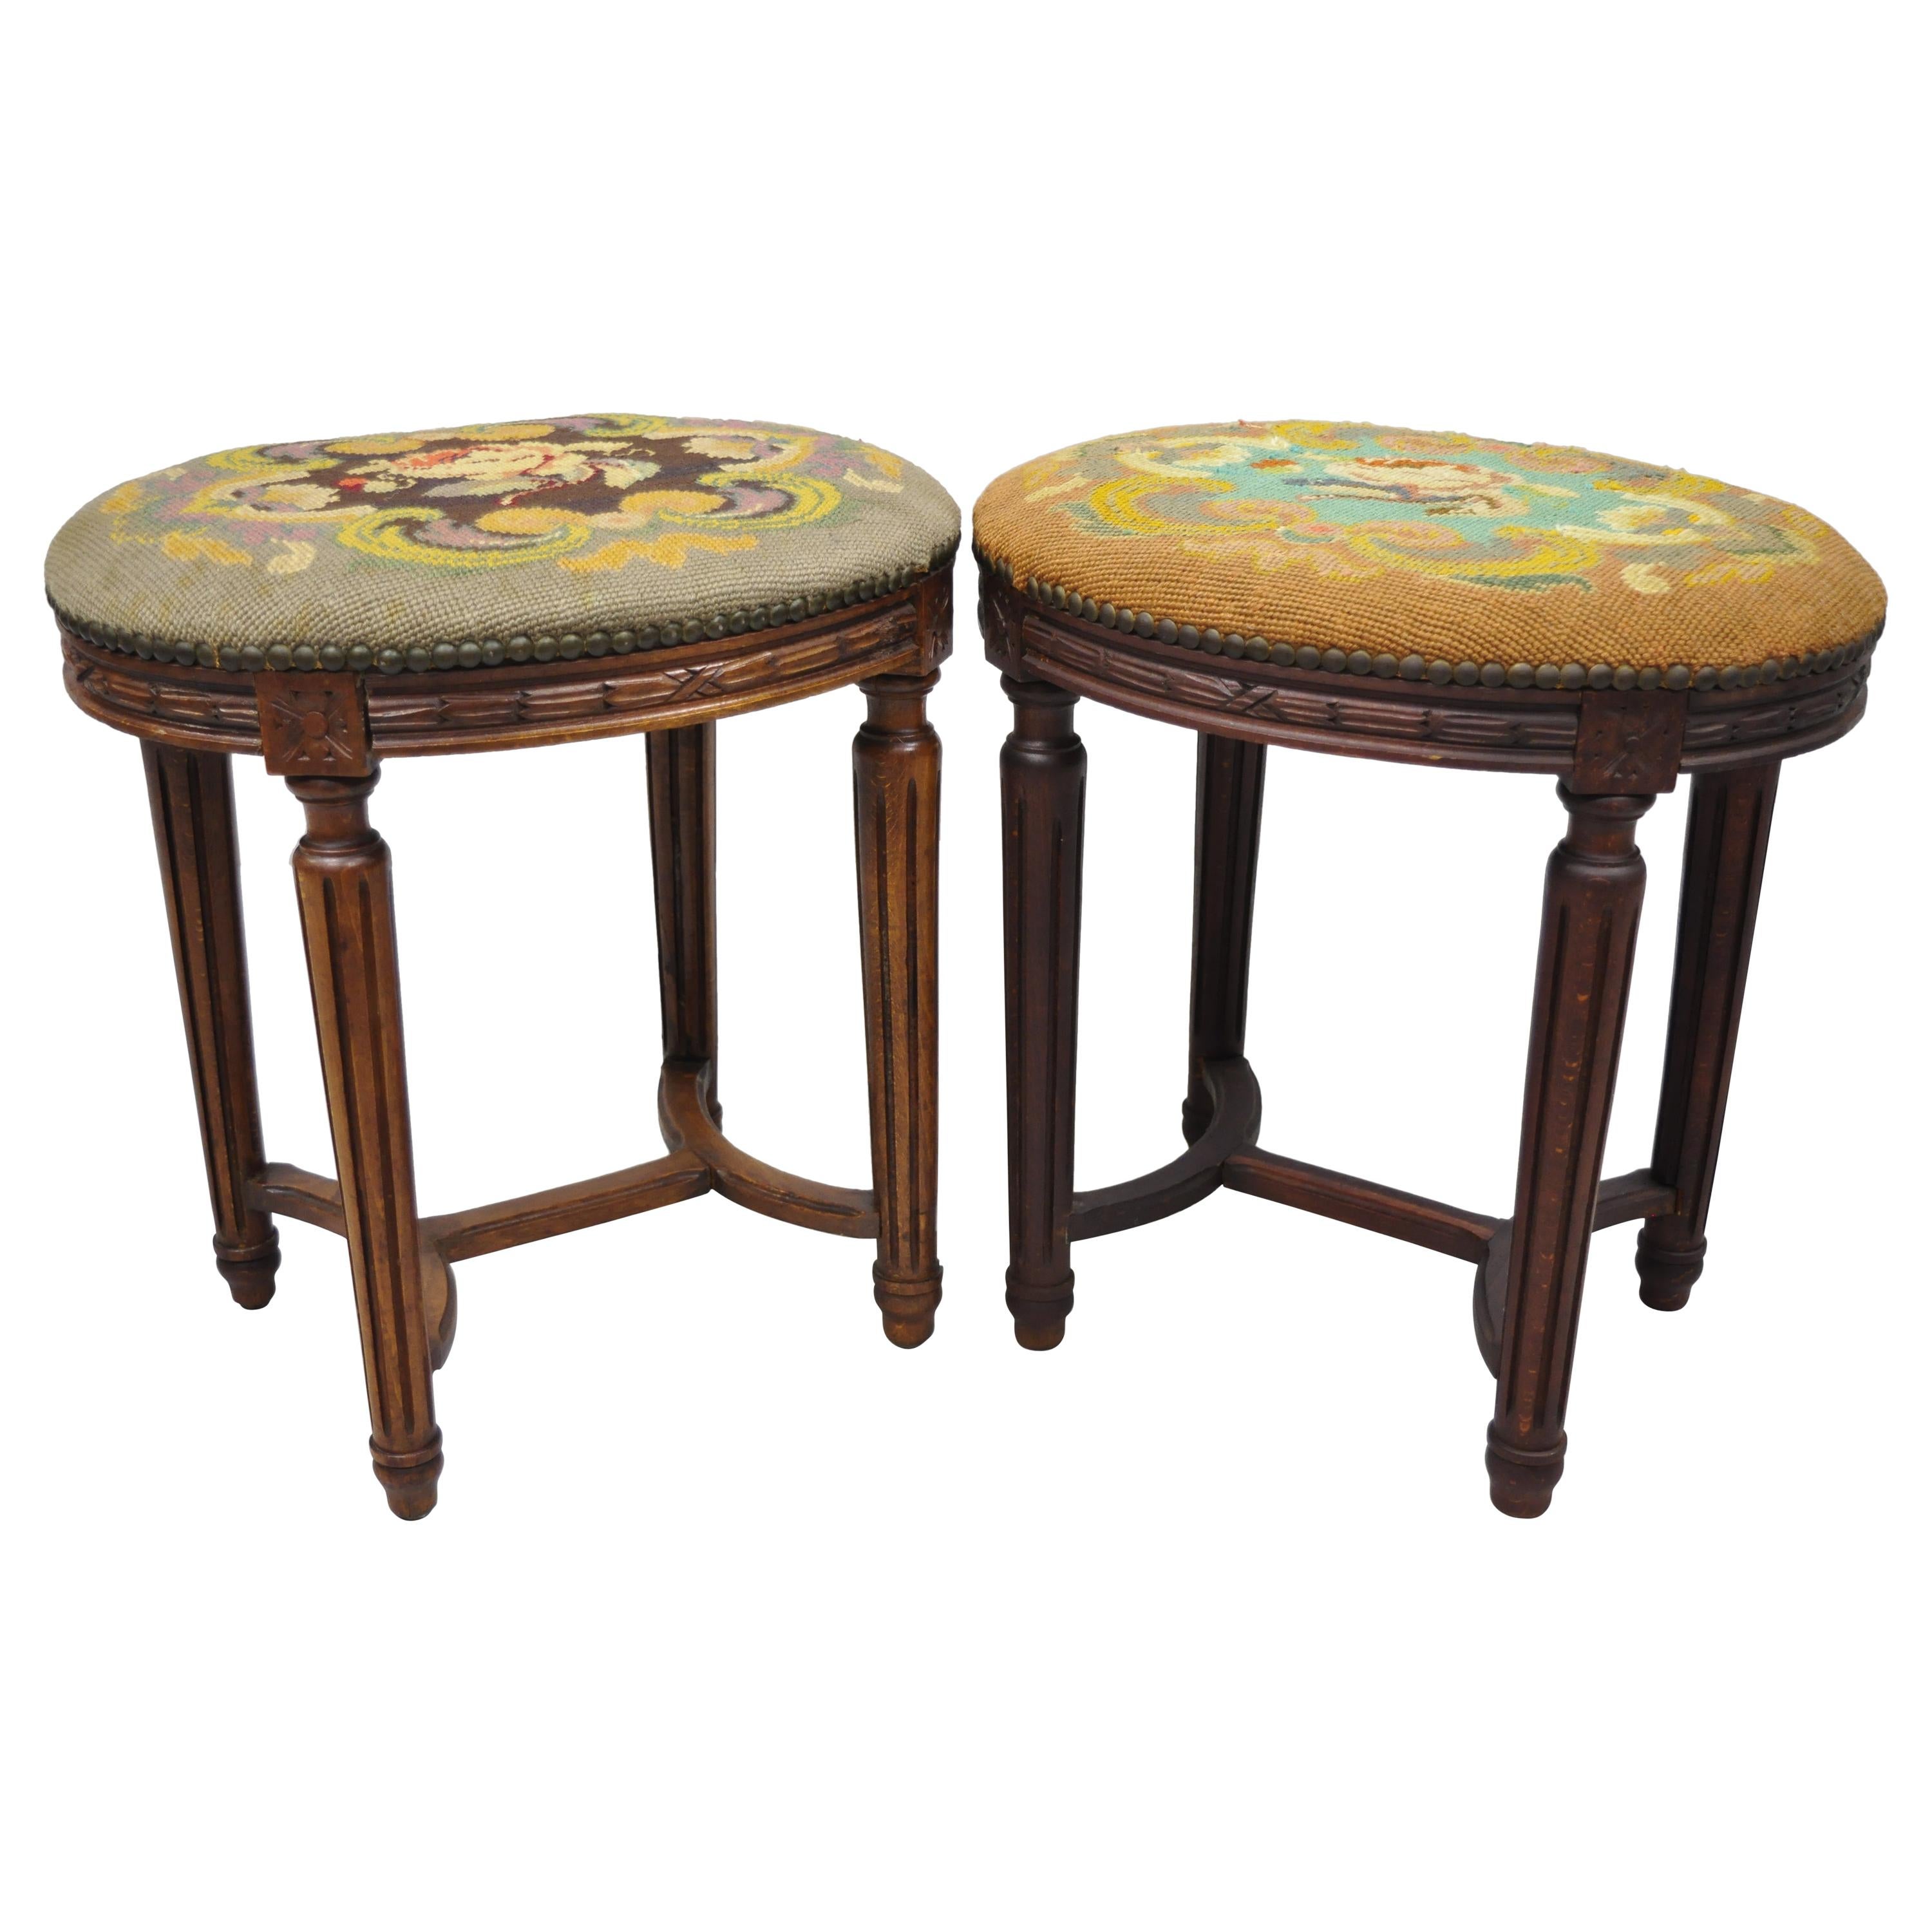 Pair of French Louis XVI Style Carved Walnut and Needlepoint Oval Stools